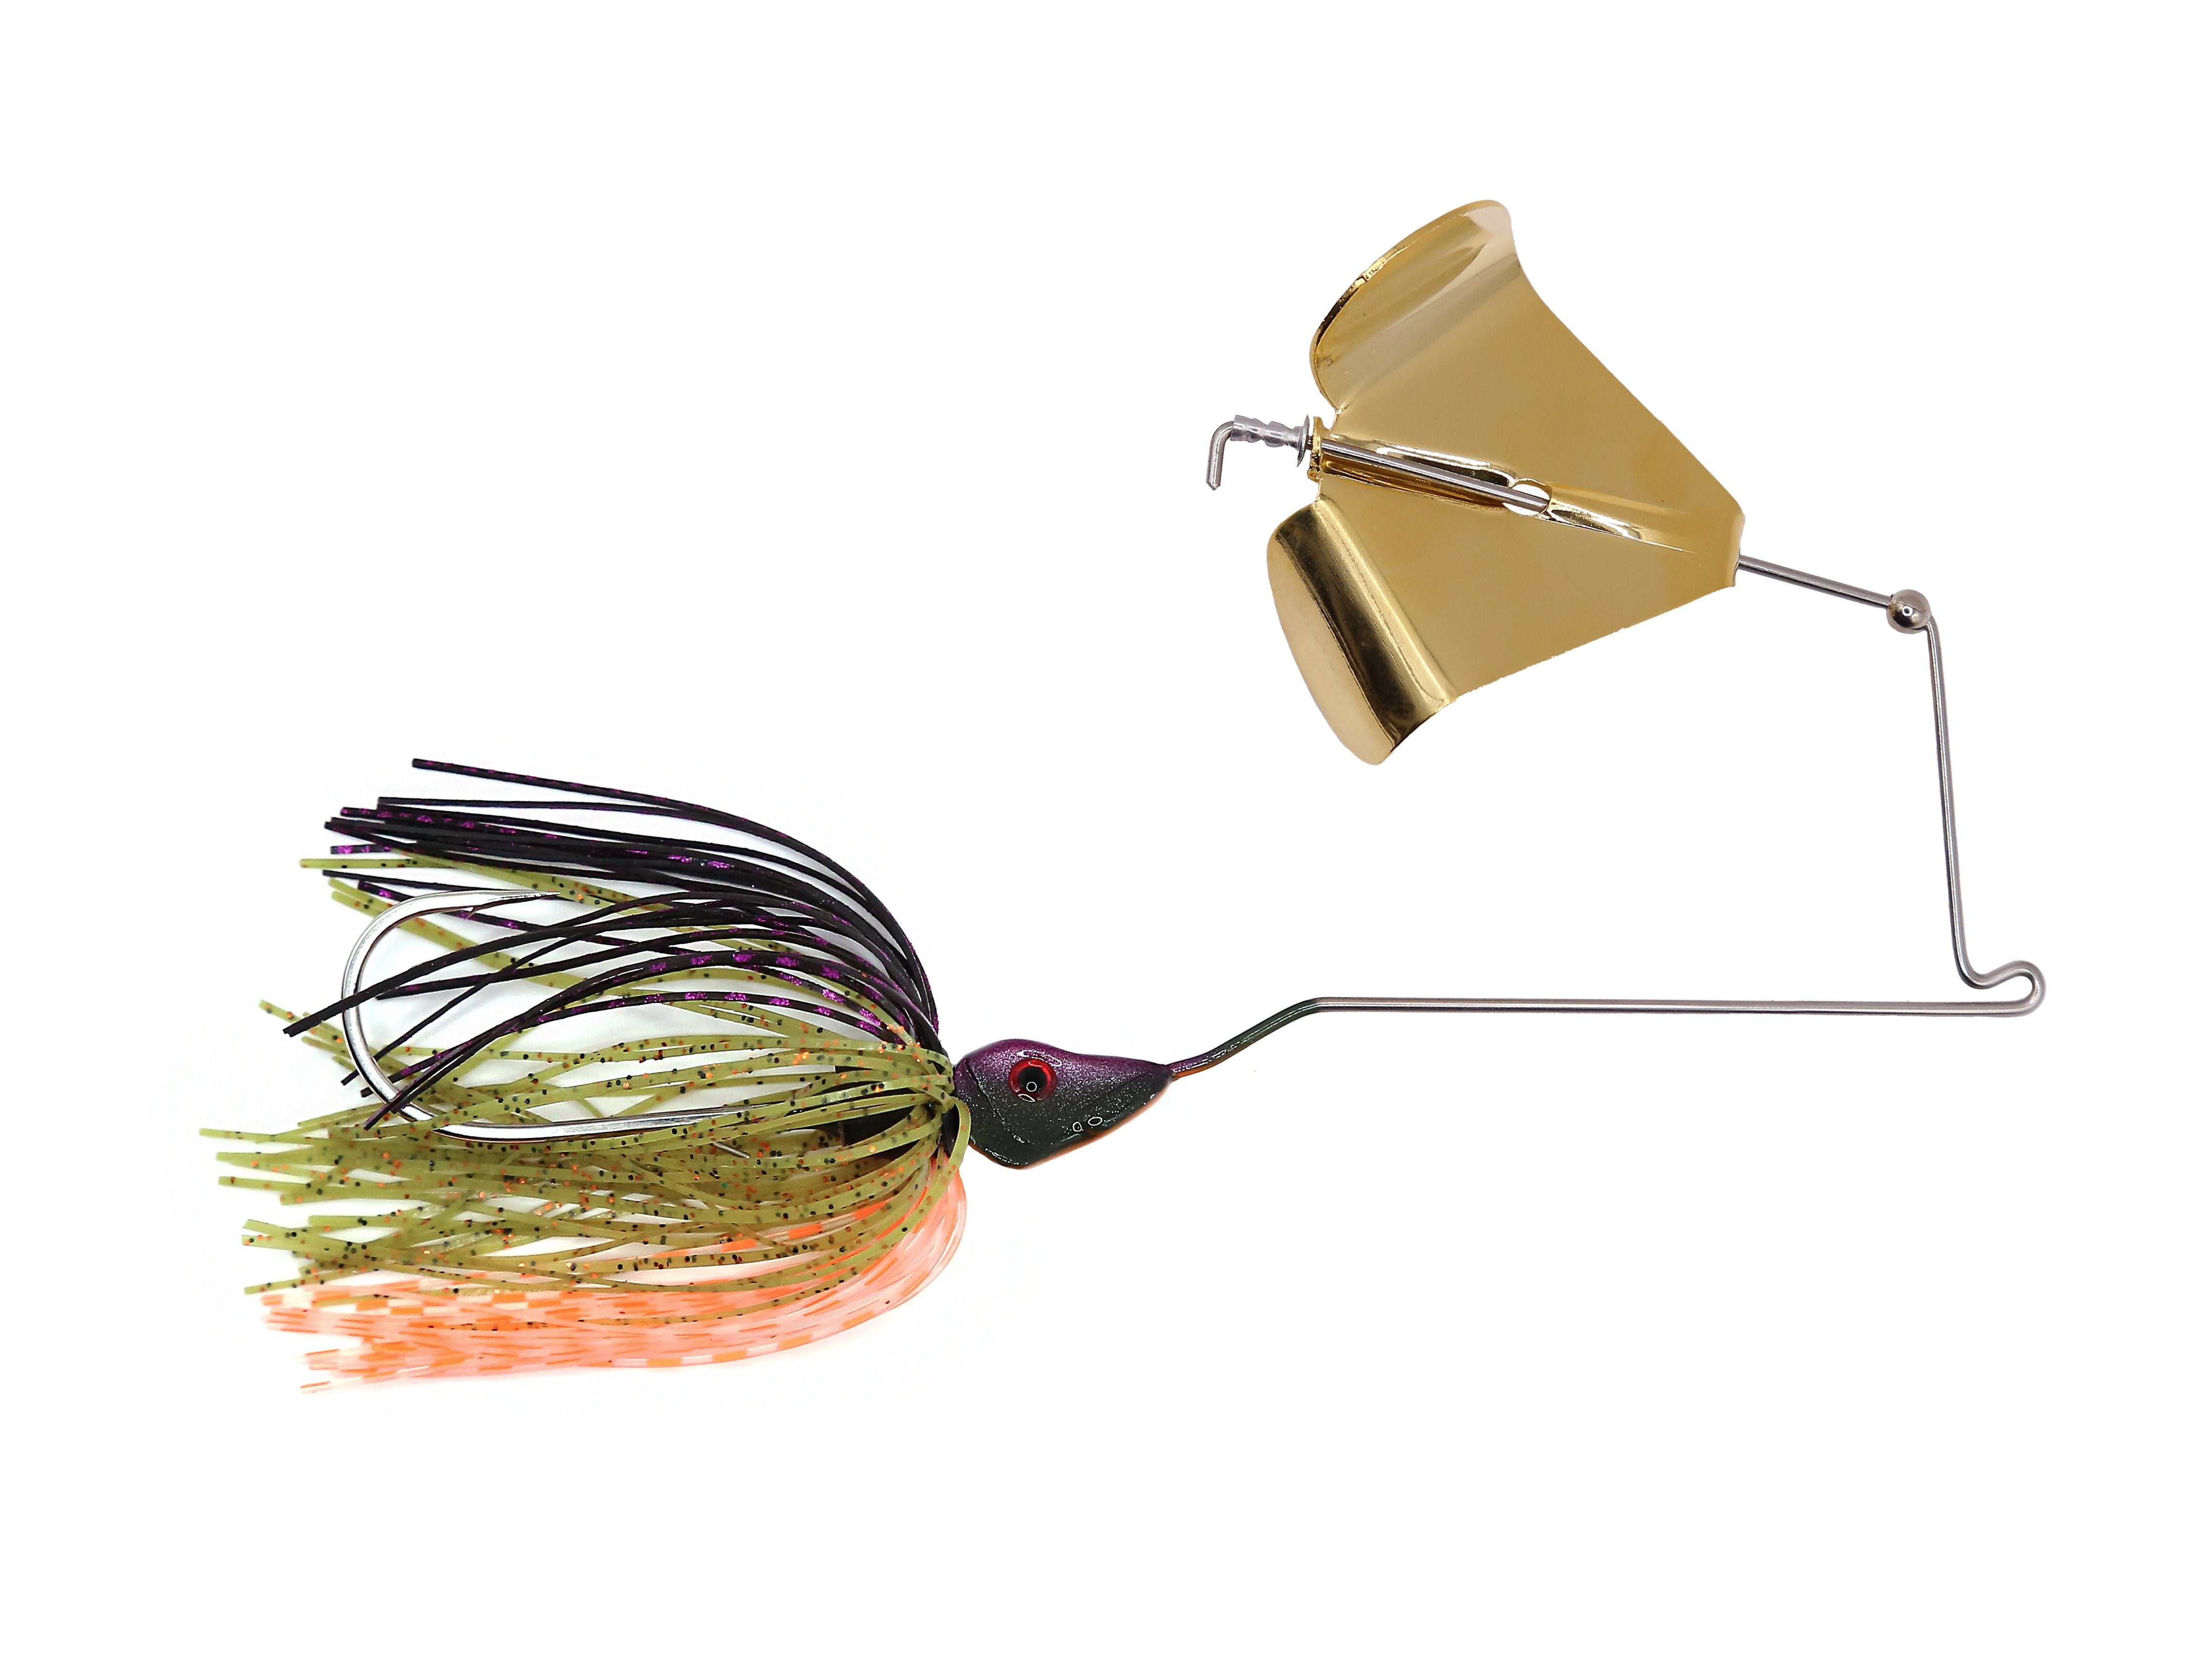 Evolution Baits Grass Burner Buzzbaits Quality And Evaluation Are Very Good  - Coyote Bait & Tackle Sales